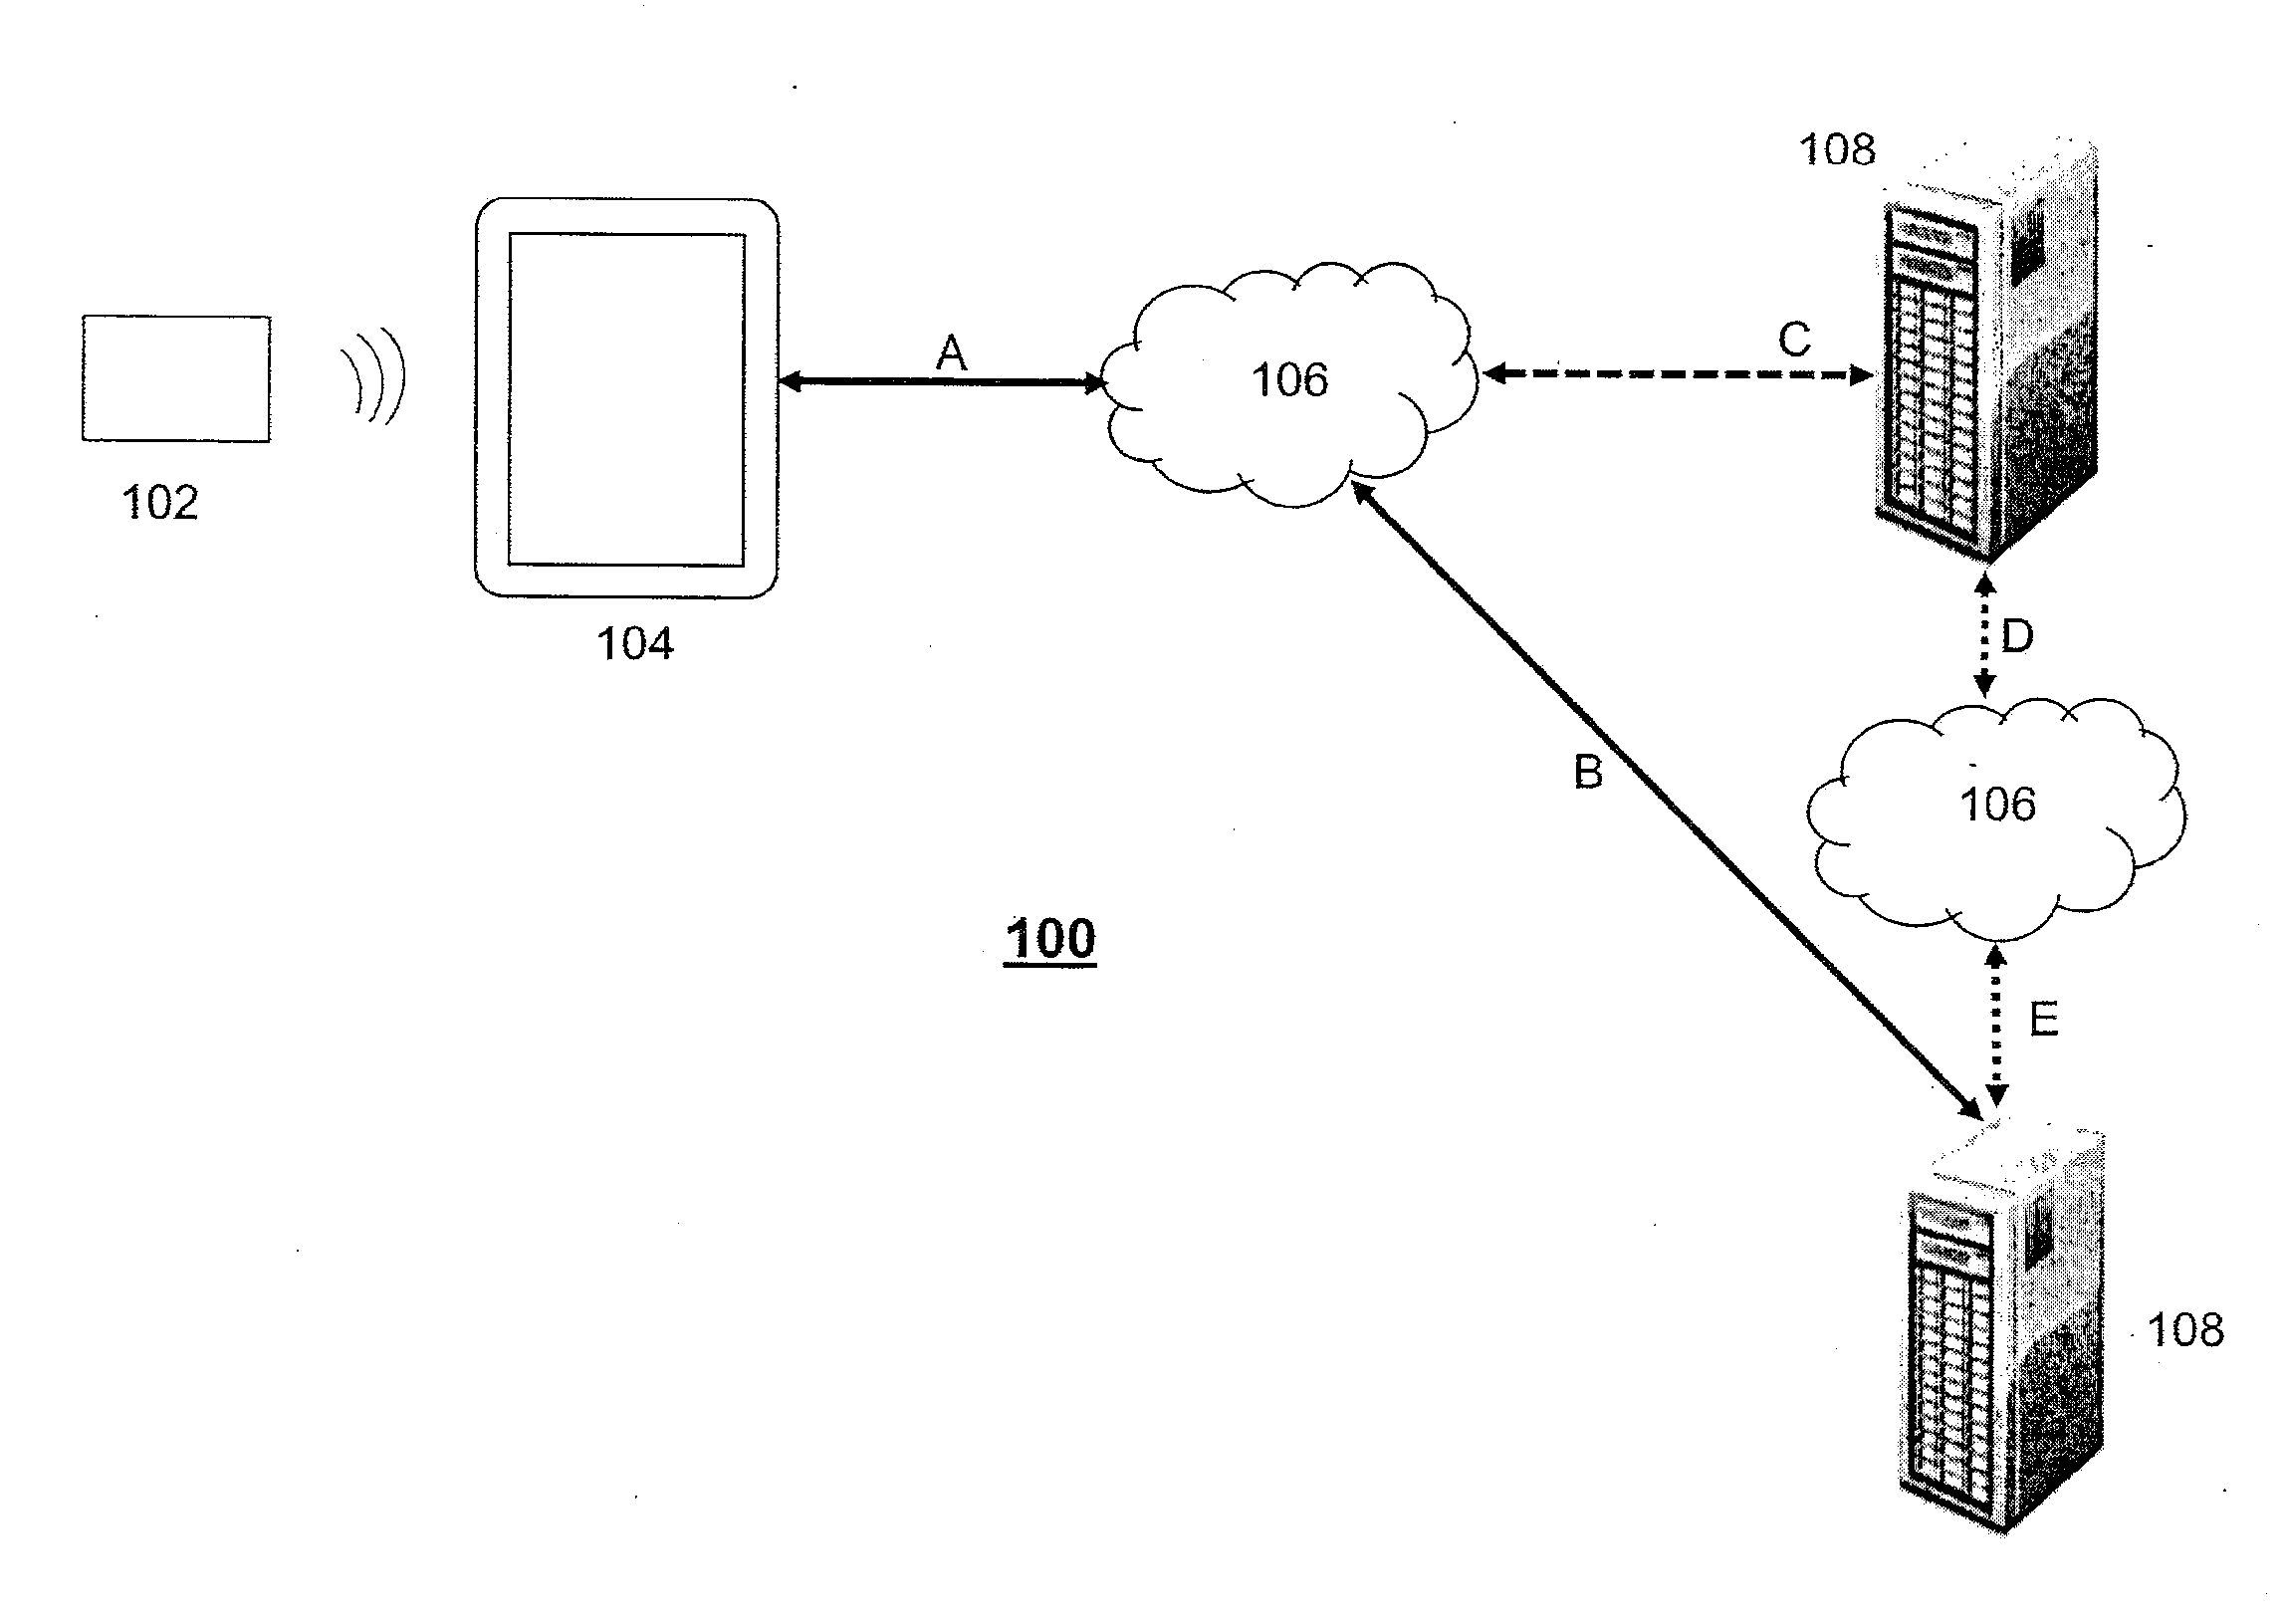 Aggregating and processing distributed data on ultra-violet (UV) exposure measurement